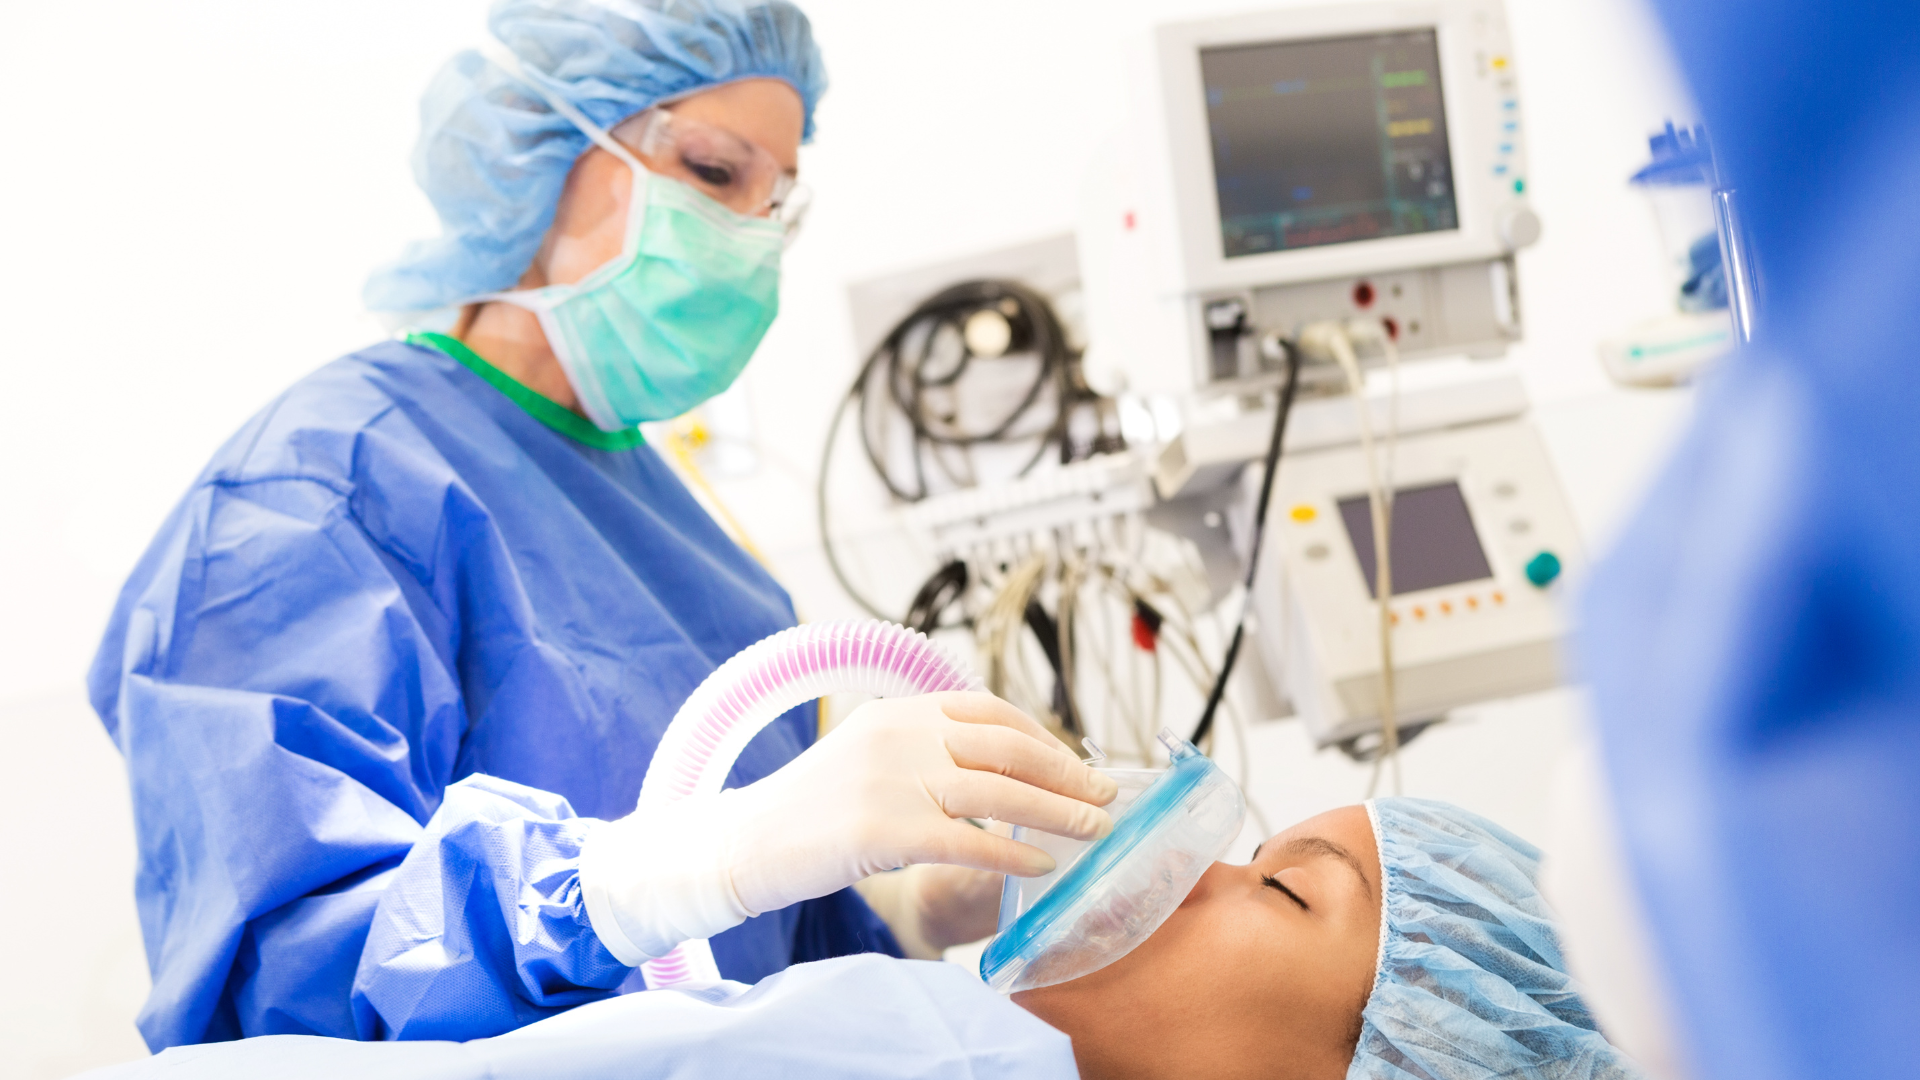 Anesthesiologist / Highest Paying Jobs